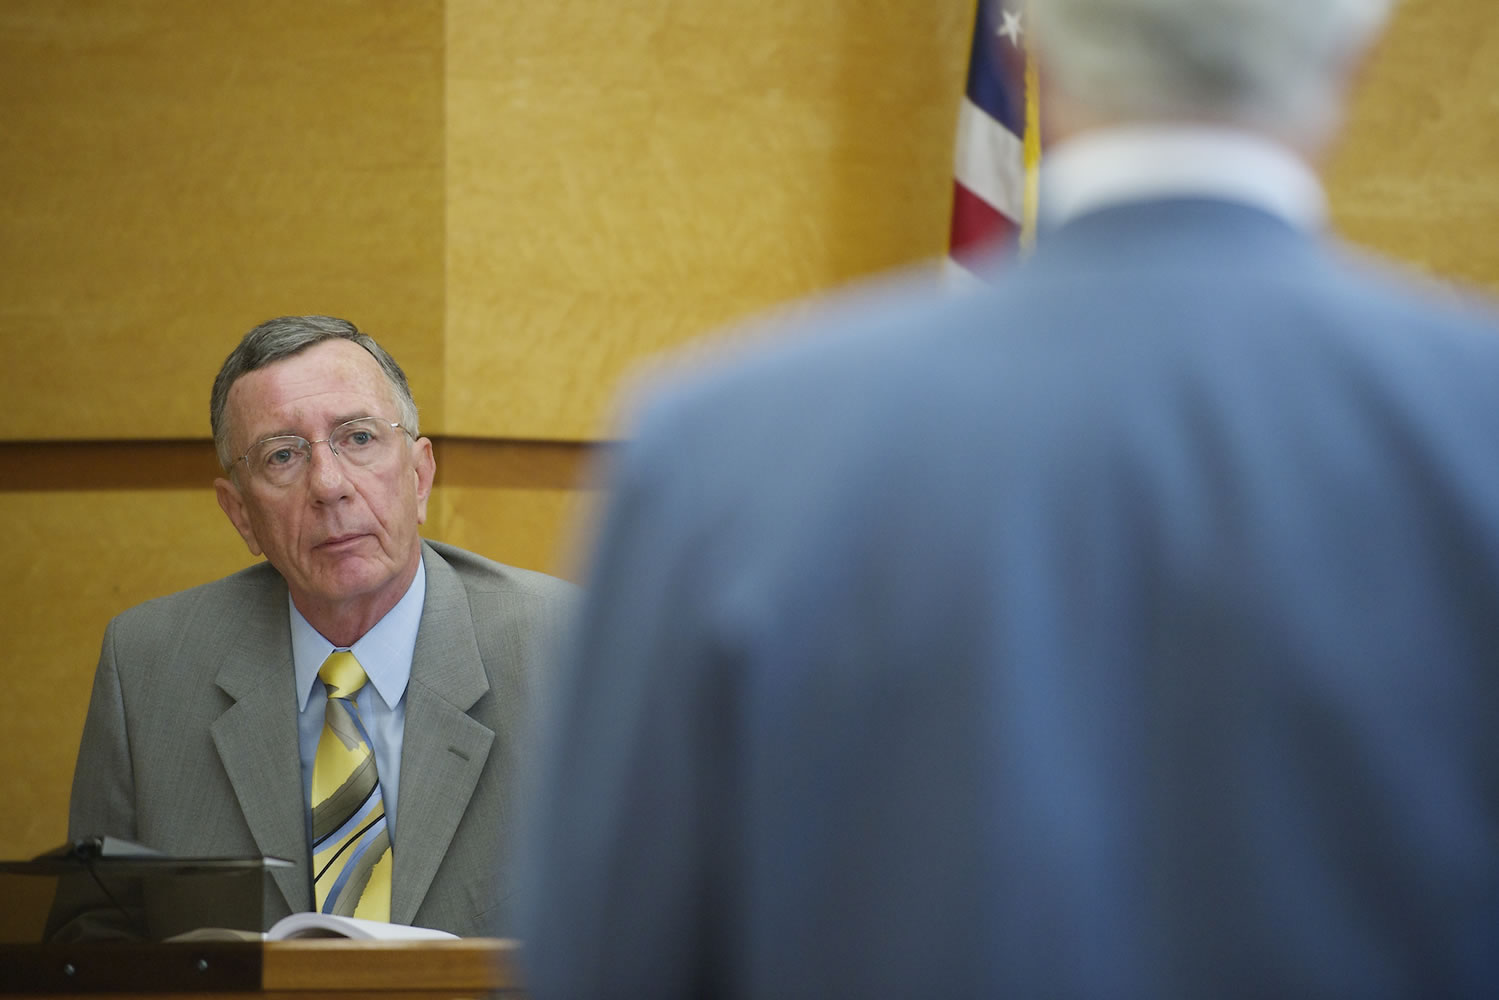 Steven Reisler, disciplinary council, asks questions of Judge John Wulle during a judicial conduct hearing Aug.